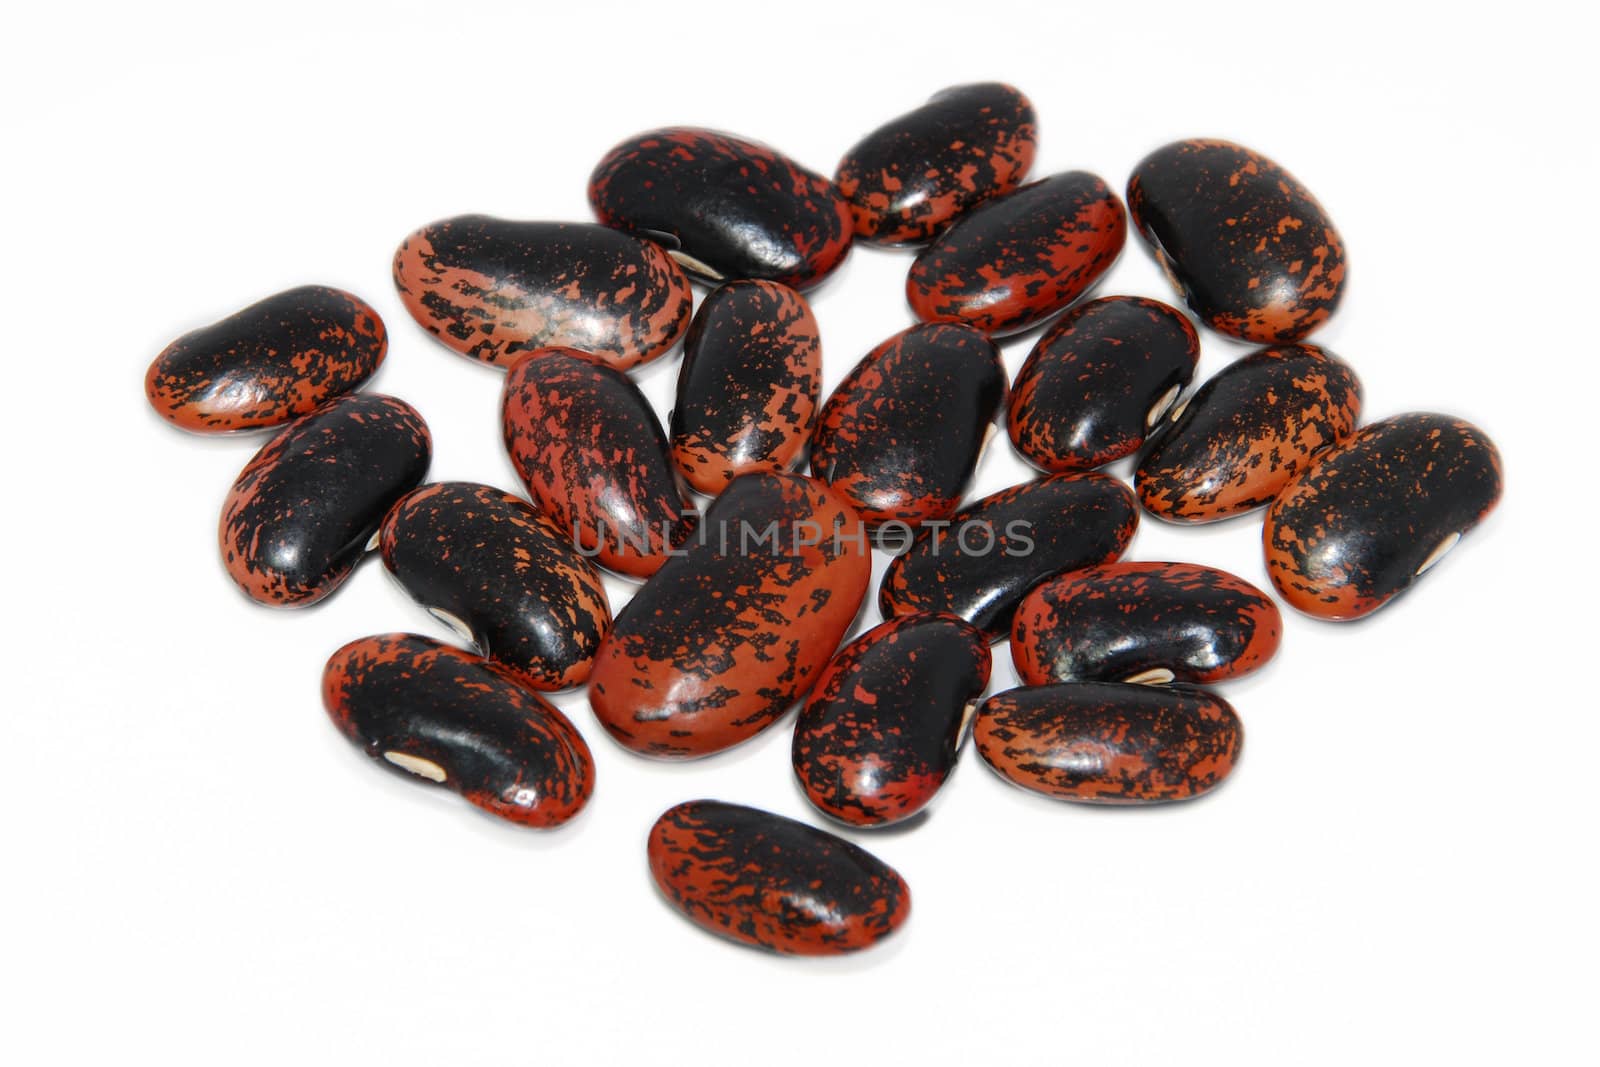 Runner bean seeds, isolated on a white background